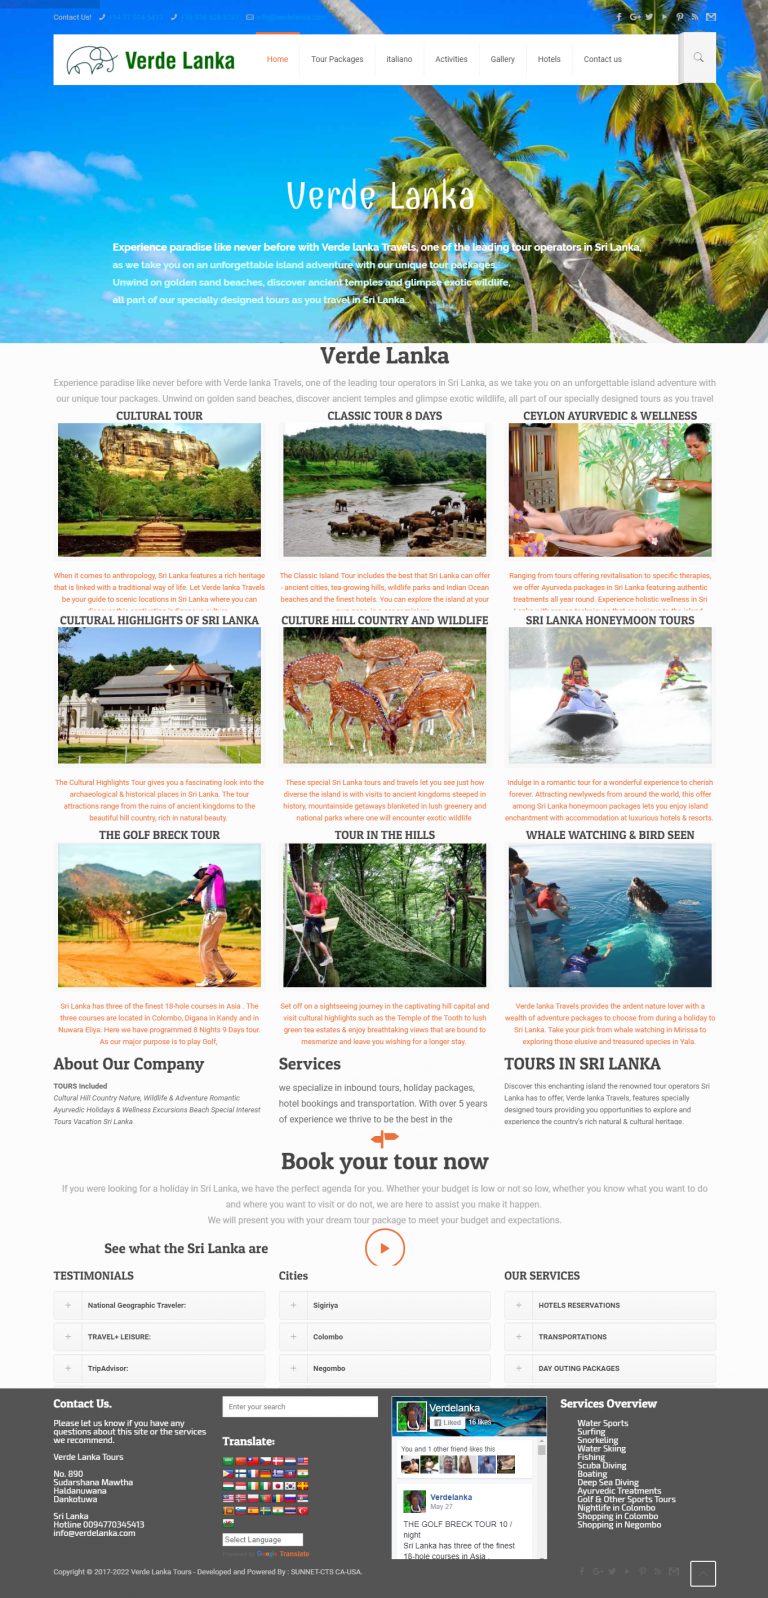 Experience paradise like never before with Verde Lanka Travels, one of the leading tour operators in Sri Lanka, as we take you on an unforgettable island adventure with our unique tour packages. Unwind on golden sand beaches, discover ancient temples and glimpse exotic wildlife, all part of our specially designed tours as you travel in Sri Lanka..